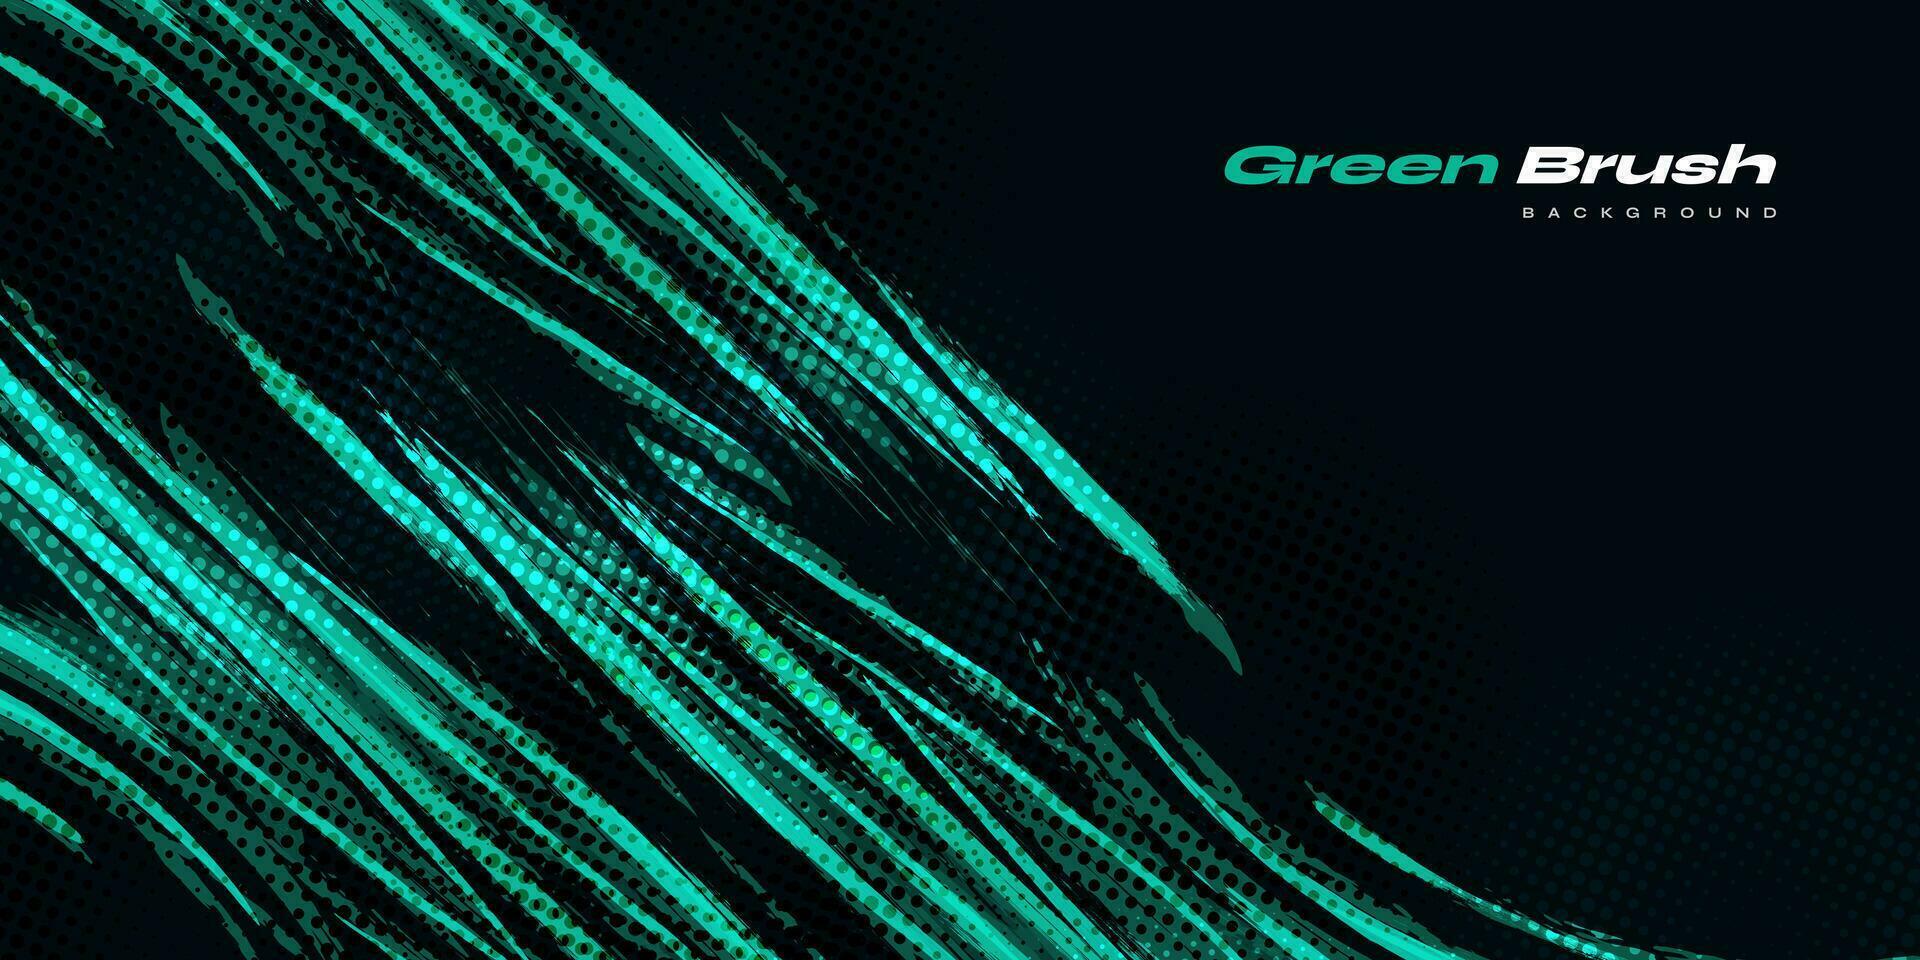 Abstract Green Brush Background with Halftone Effect. Sport Banner. Scratch and Texture Elements For Design vector